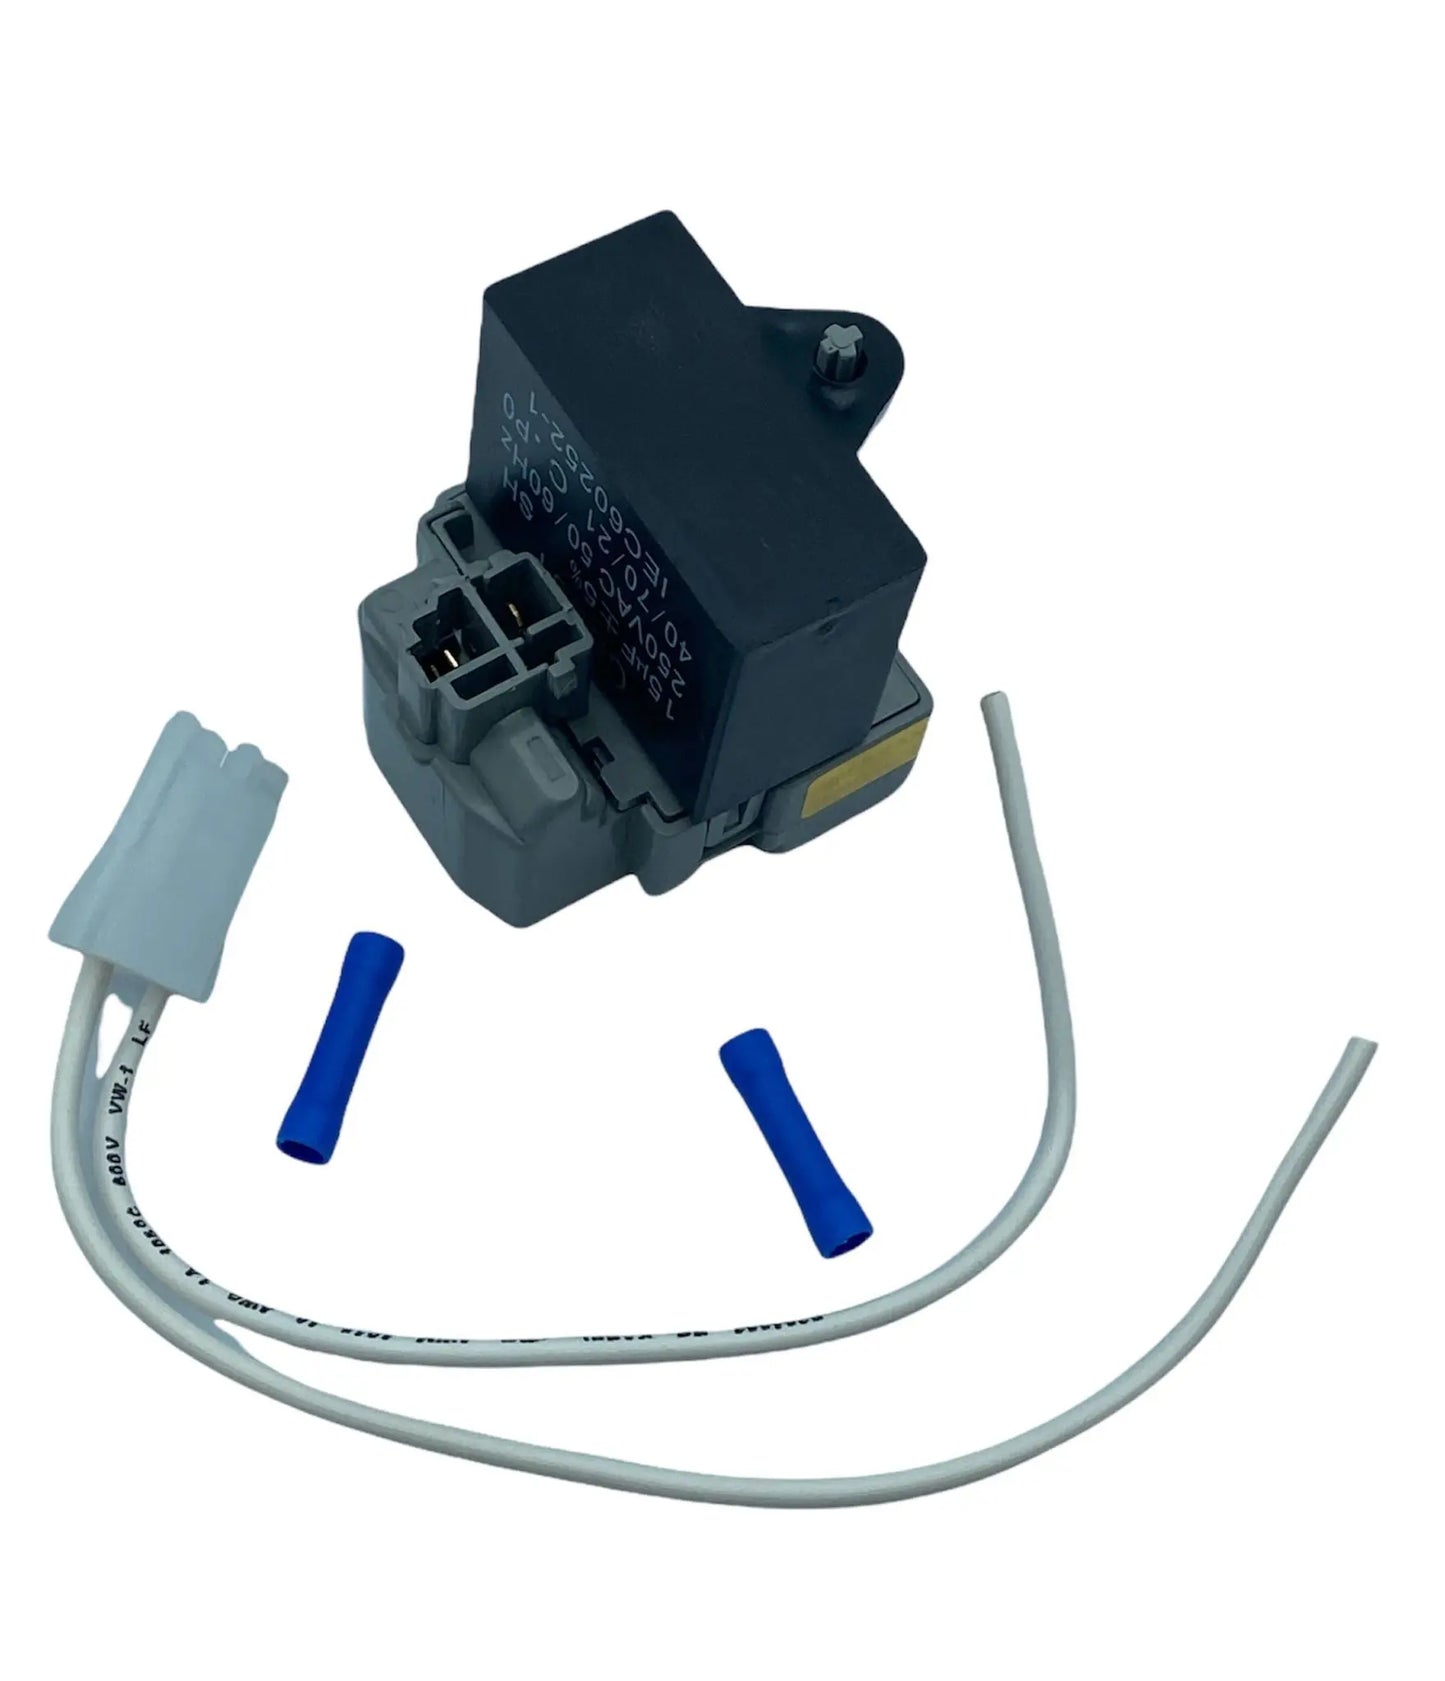 G.E Refrigerator Start Device Kit - WR08X10097 or WR08X10112,  REPLACES: 1476768 AP4412995 PS2354411 EAP2354411 PD00036771 INVERTEC